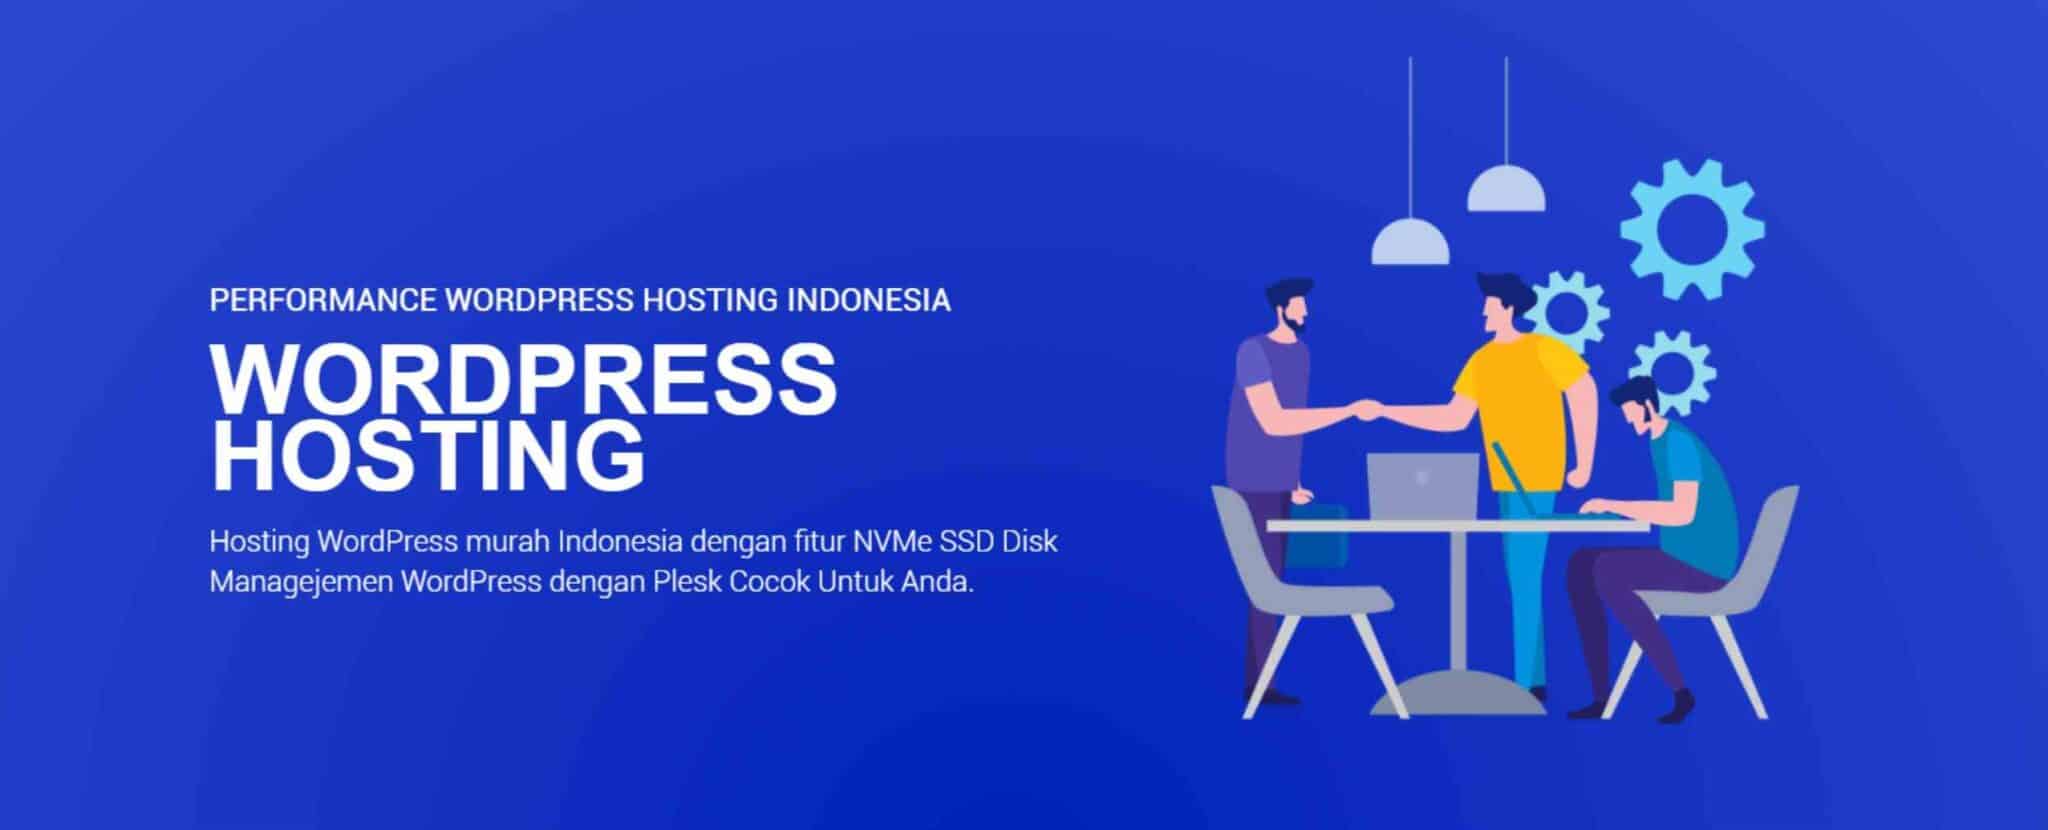 Review Warnahost Paling Update - Hosting Review Indonesia Warnahost 2020